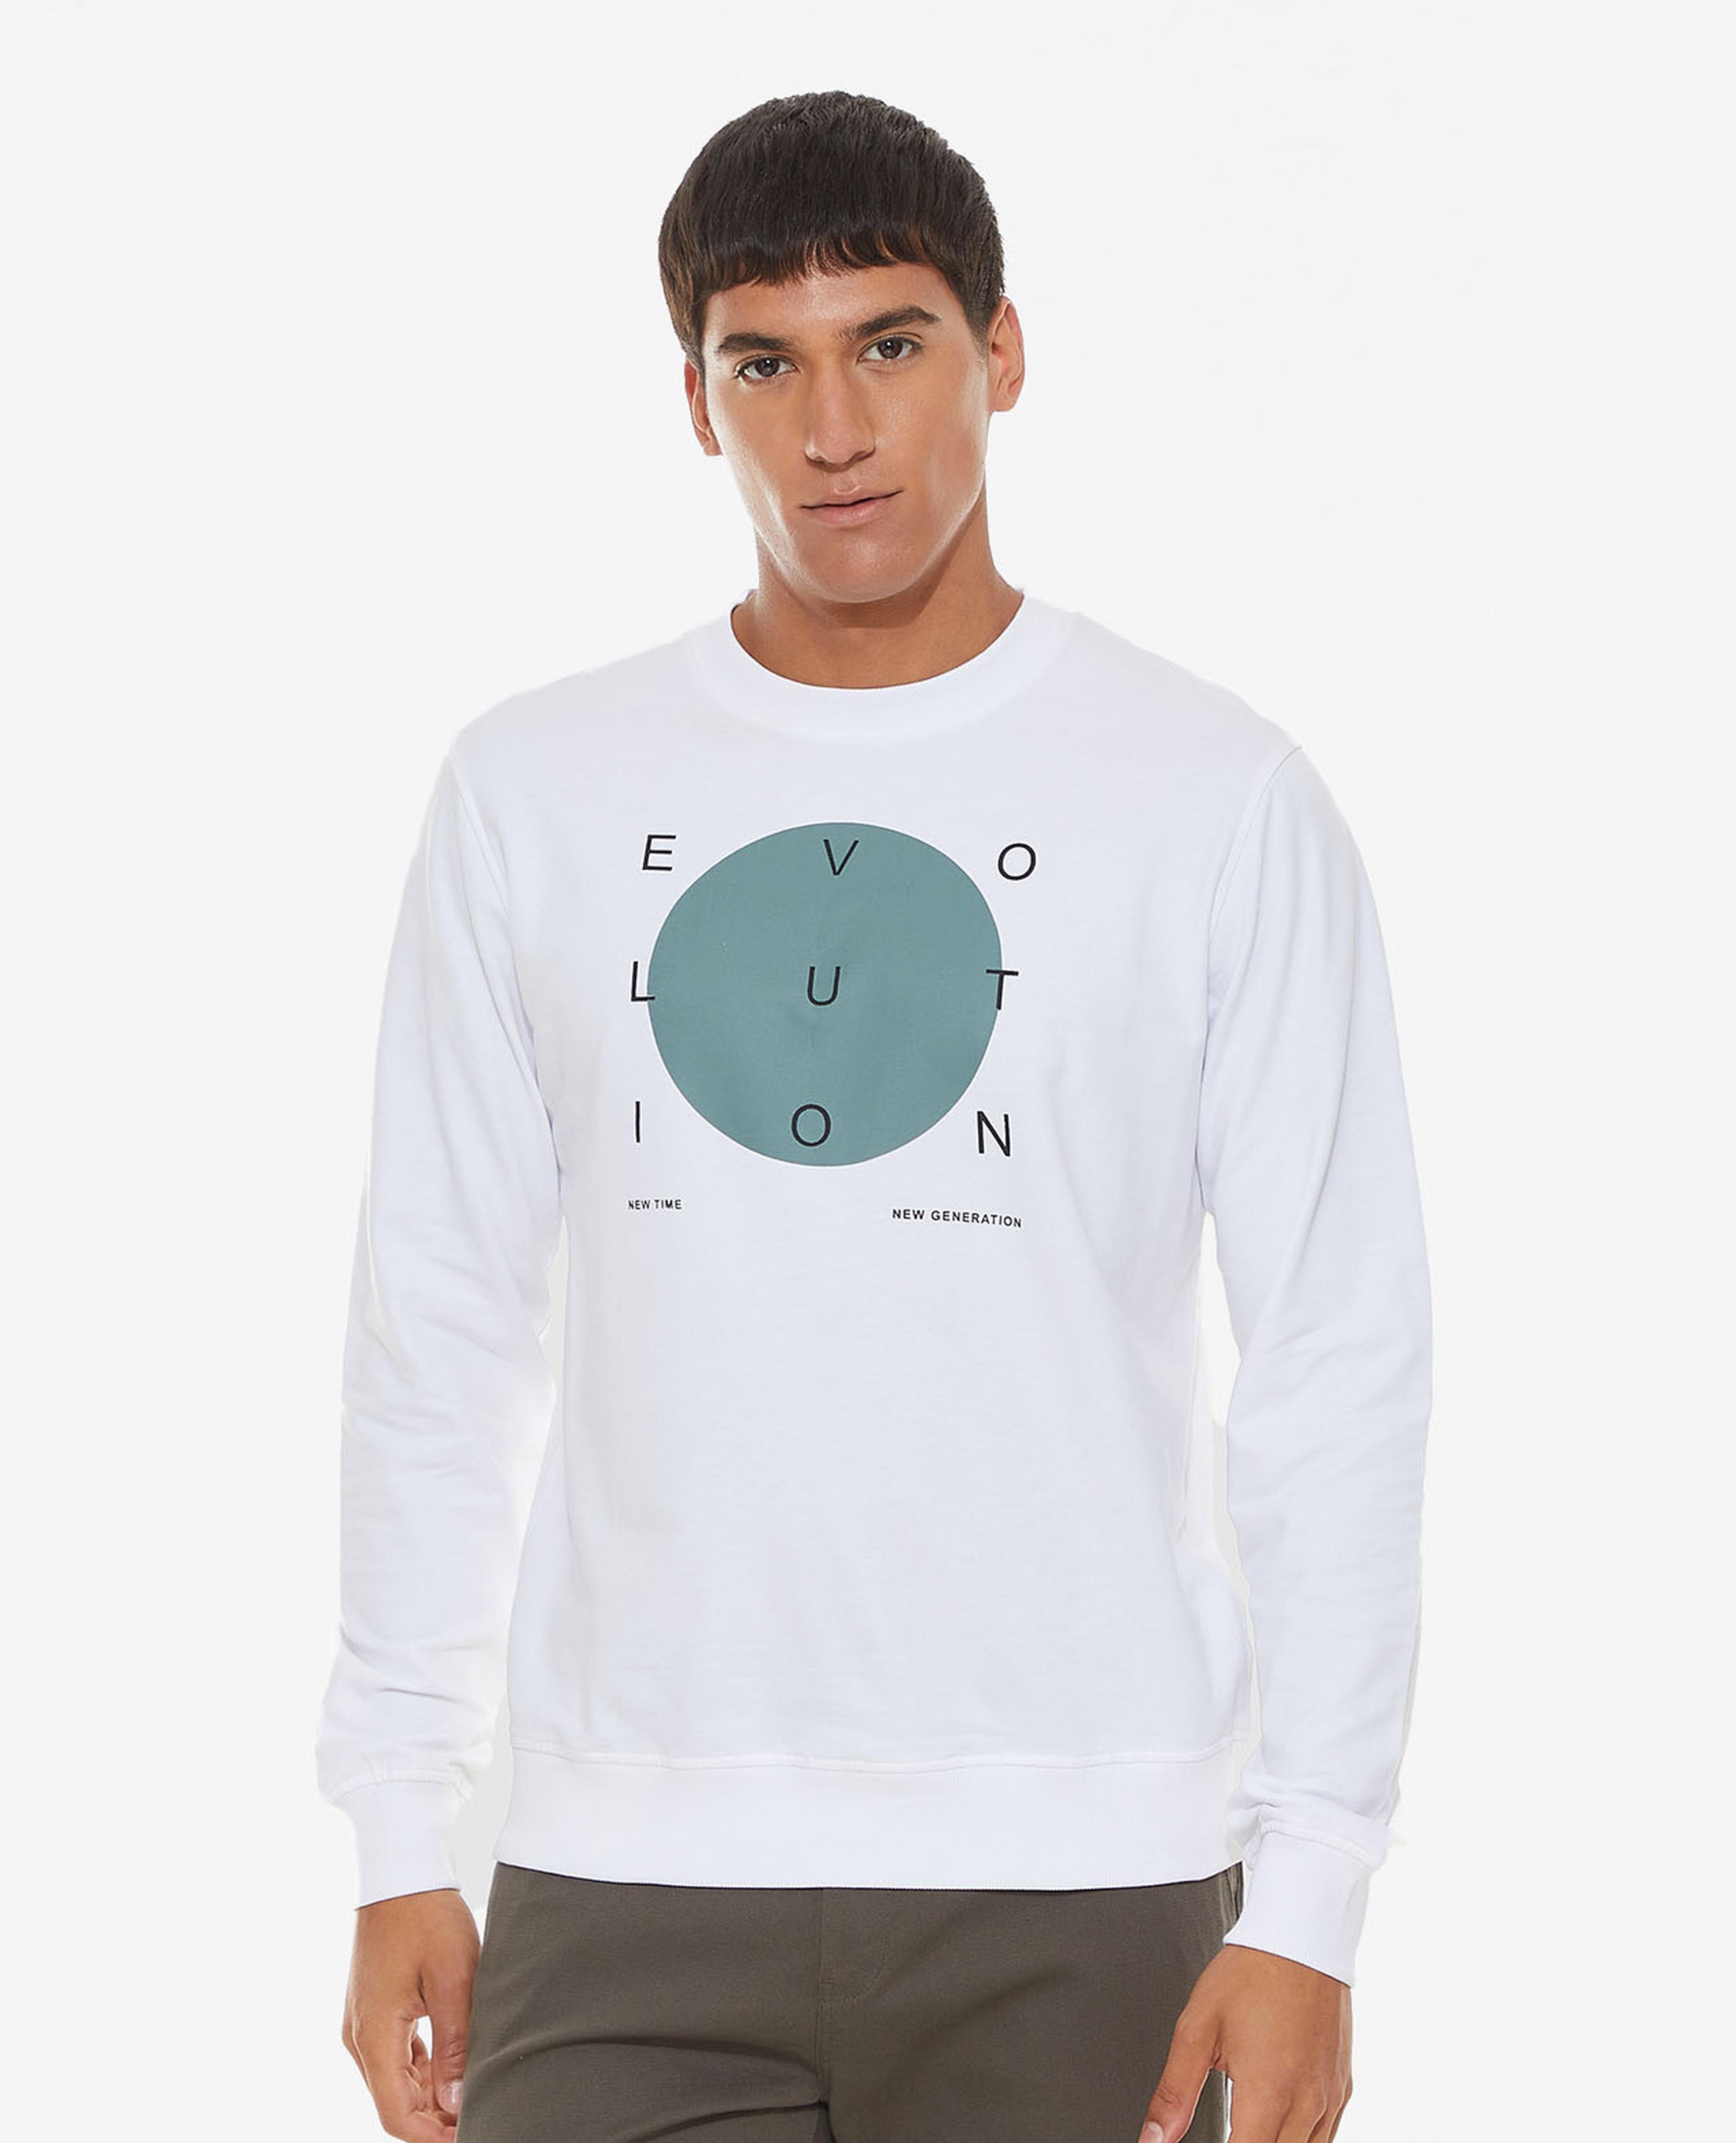 Printed Sweatshirt with Crew Neck and Long sleeves